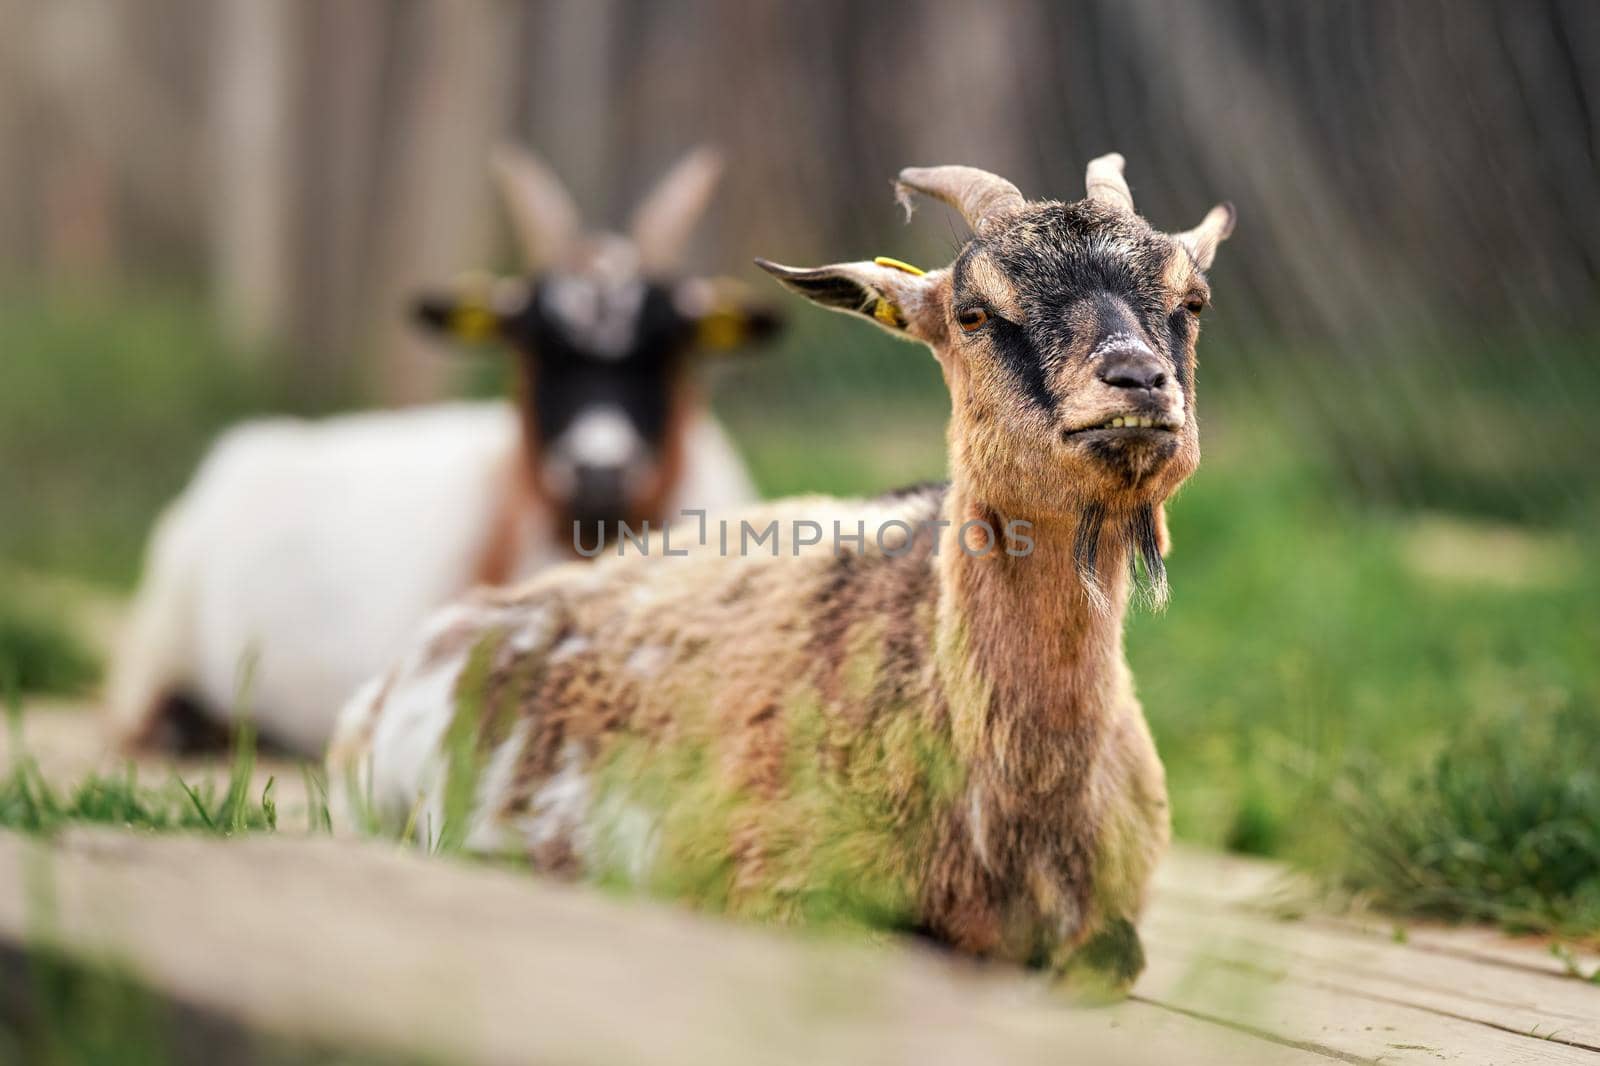 American Pygmy Cameroon goat resting on the ground, green grass near, another blurred animal background, closeup detail.